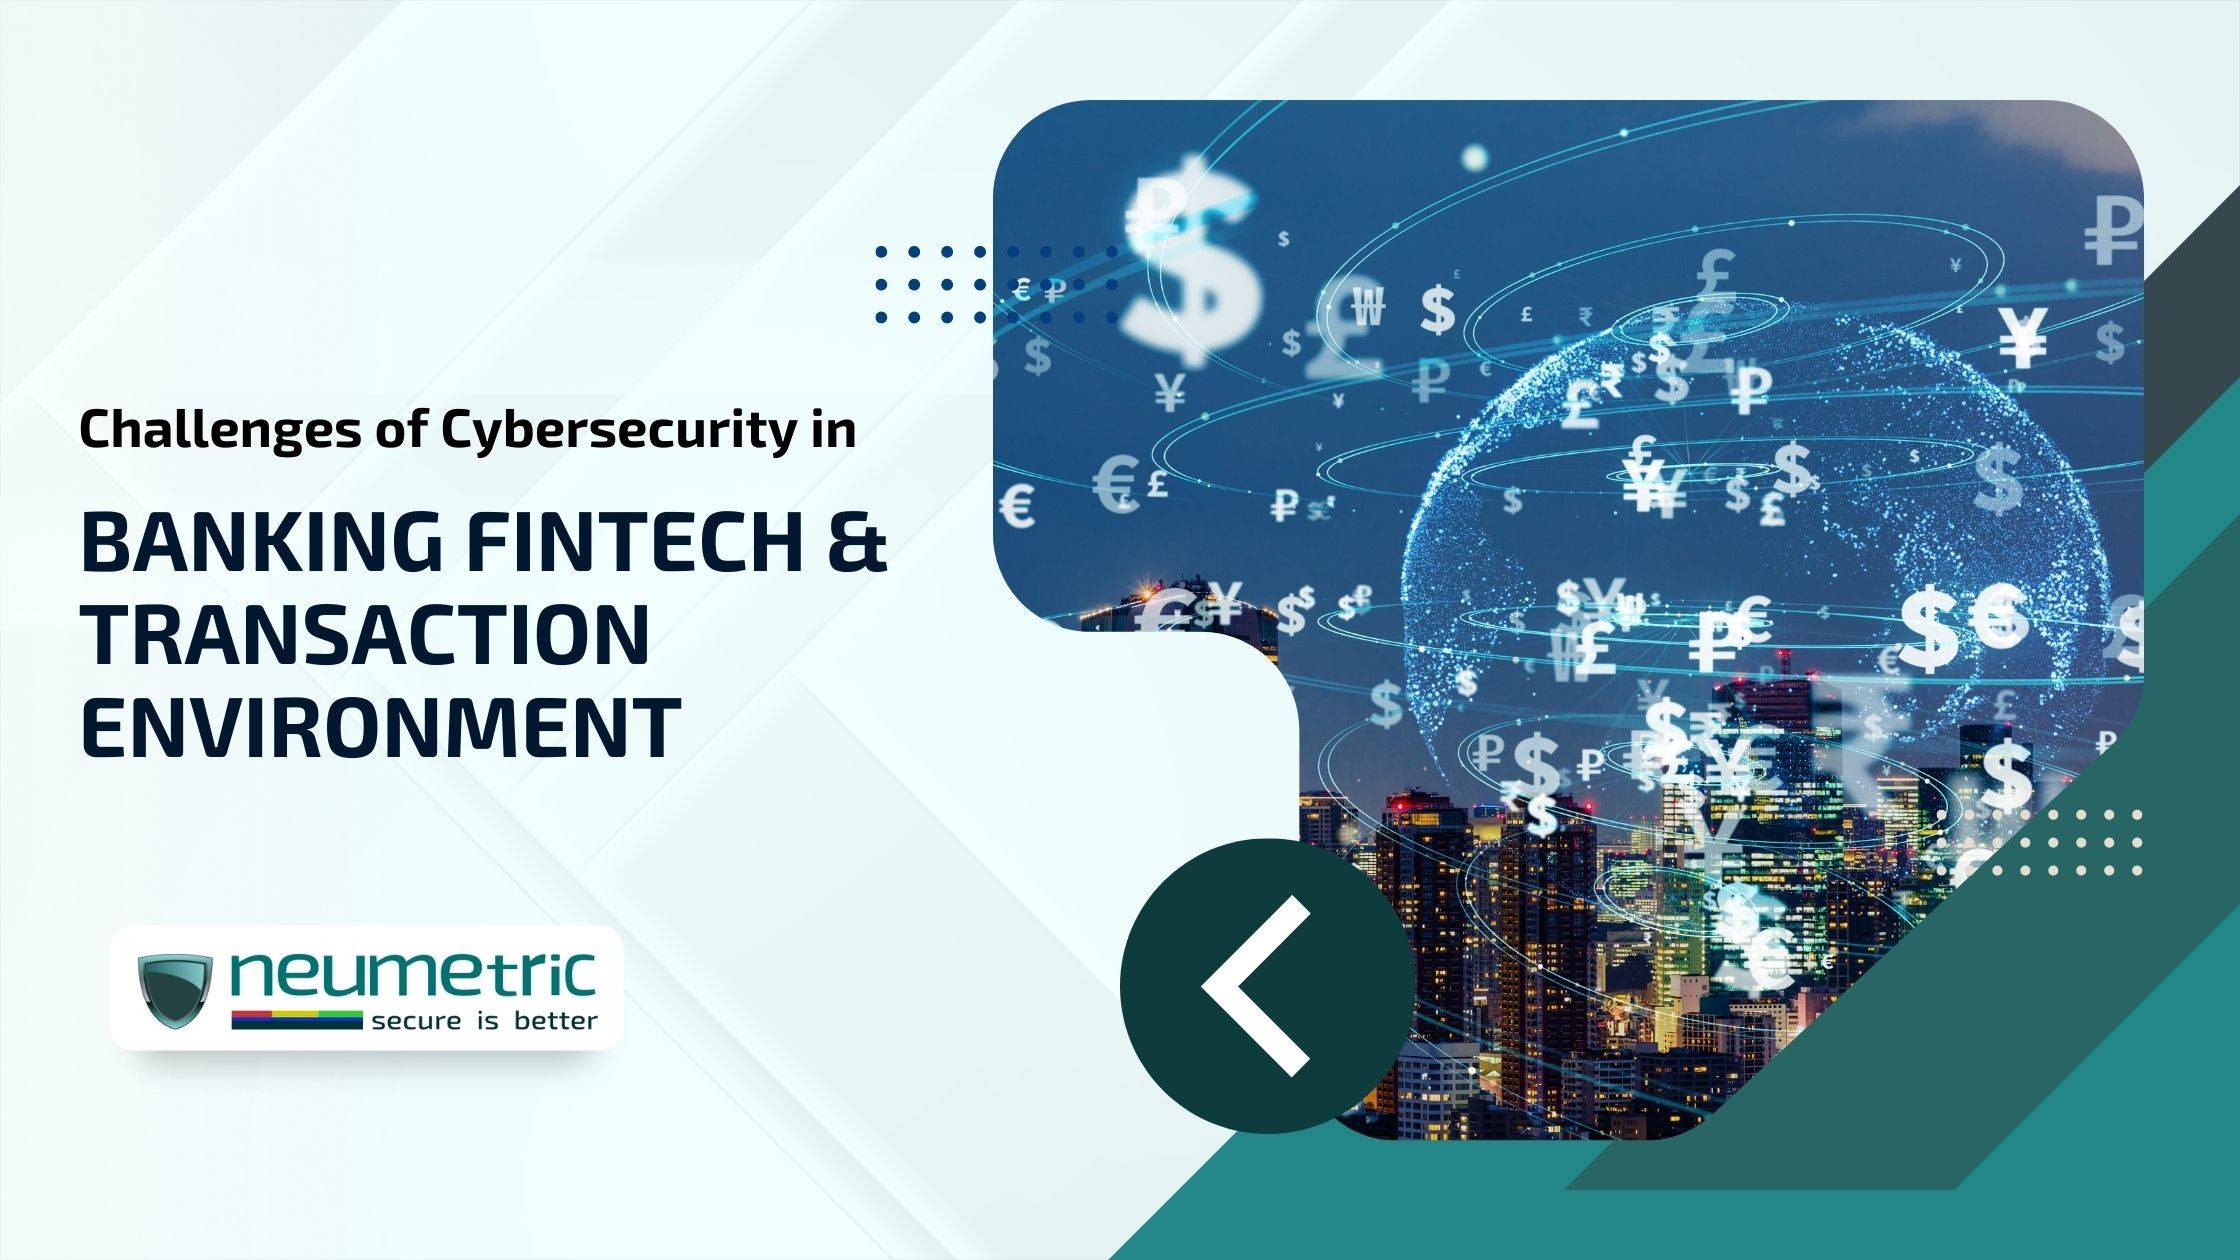 Challenges of Cybersecurity in Banking Fintech & Transaction Environment